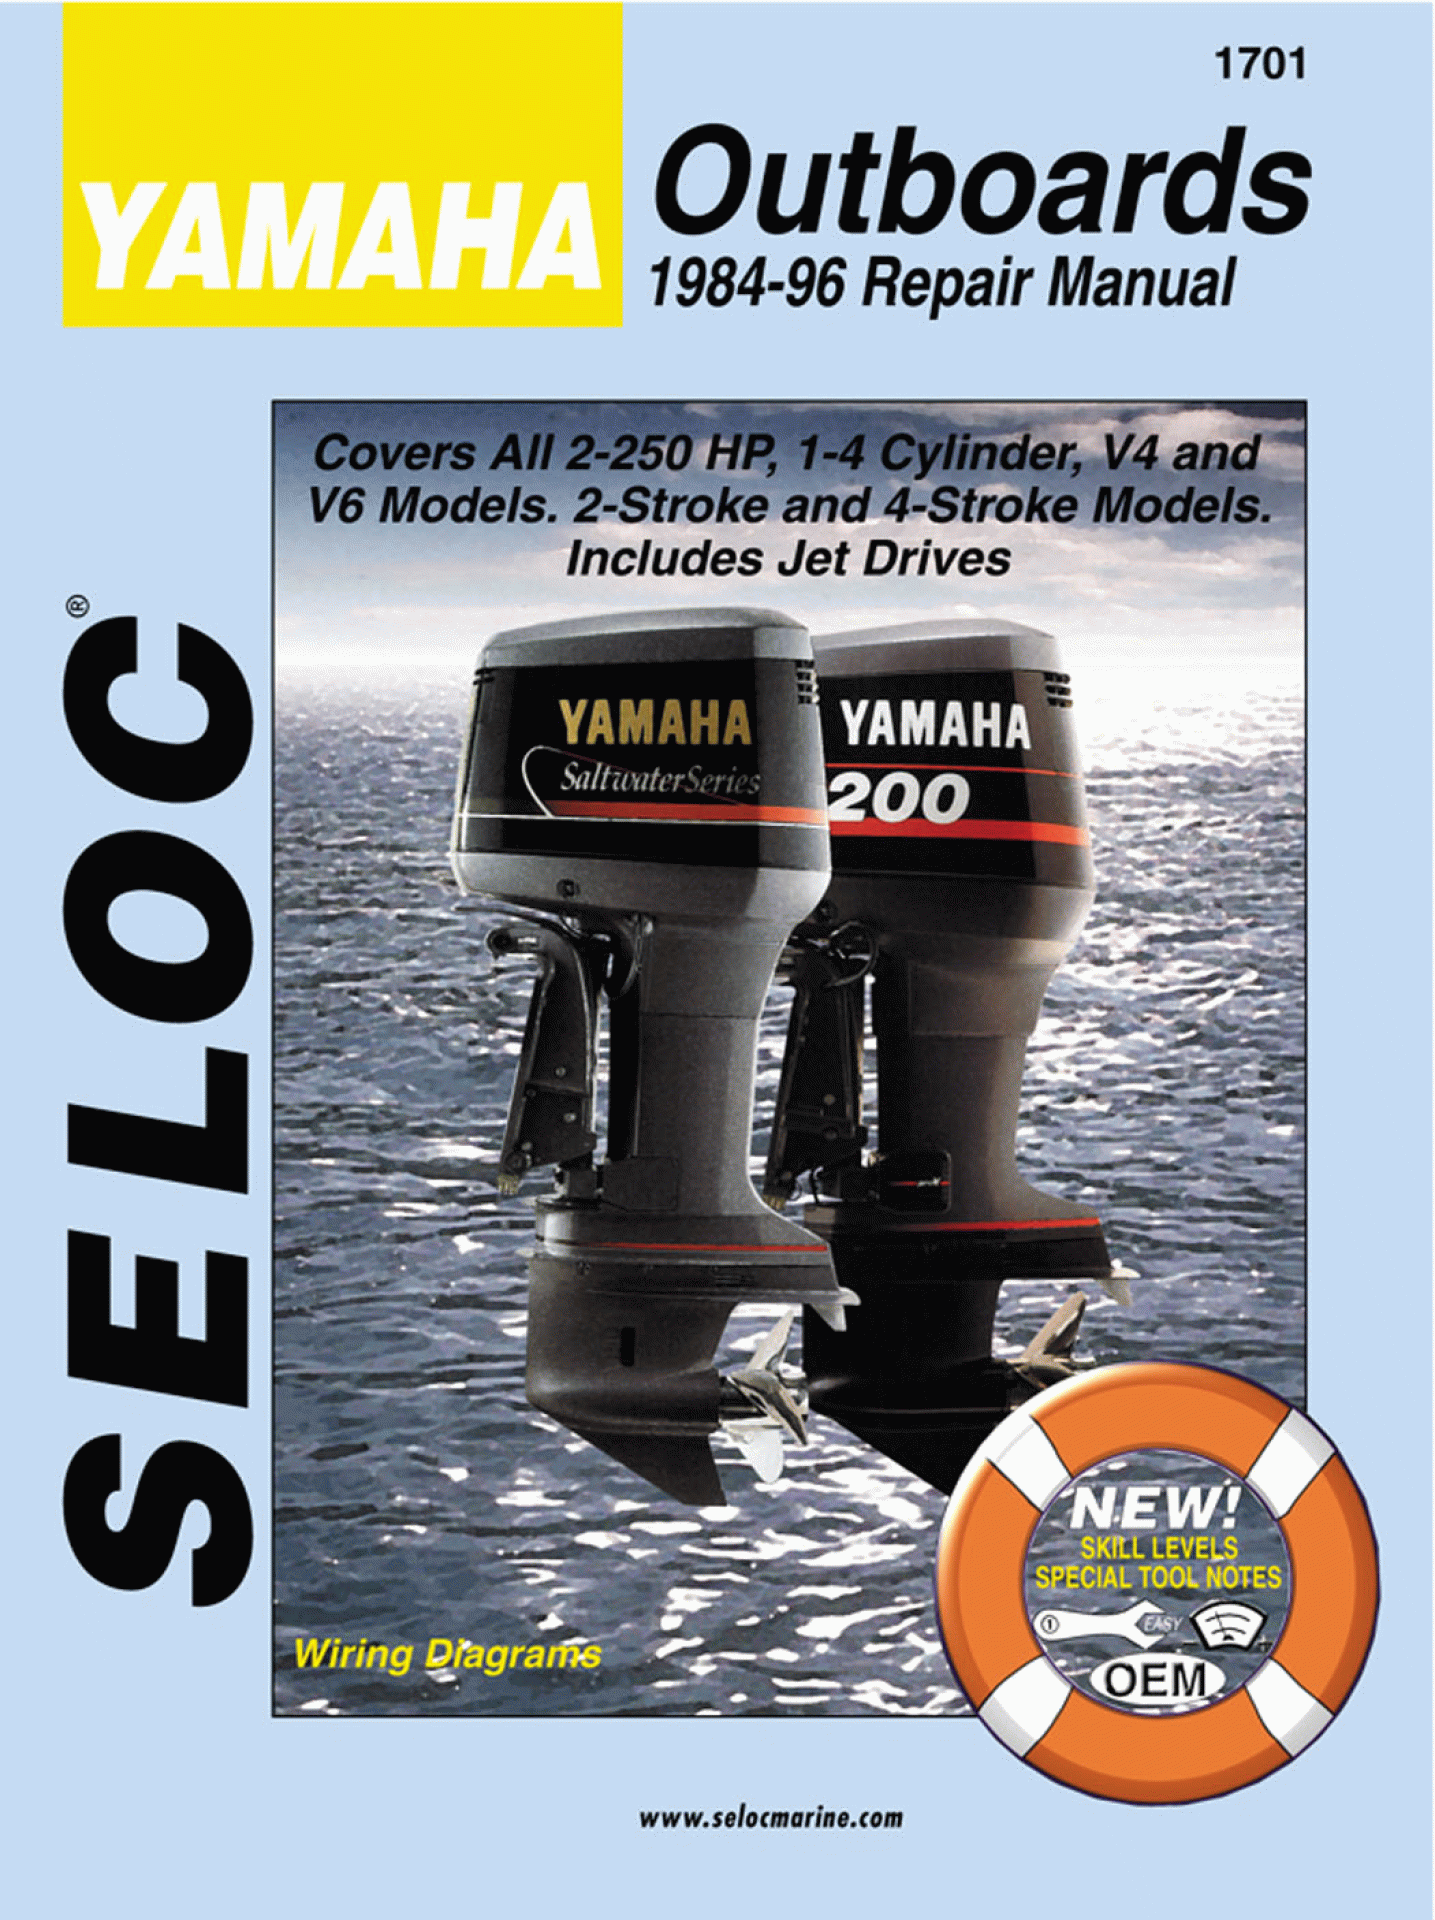 SELOC PUBLISHING | 18-01701 | REPAIR MANUAL Yamaha Outboards All Engines 1984-96